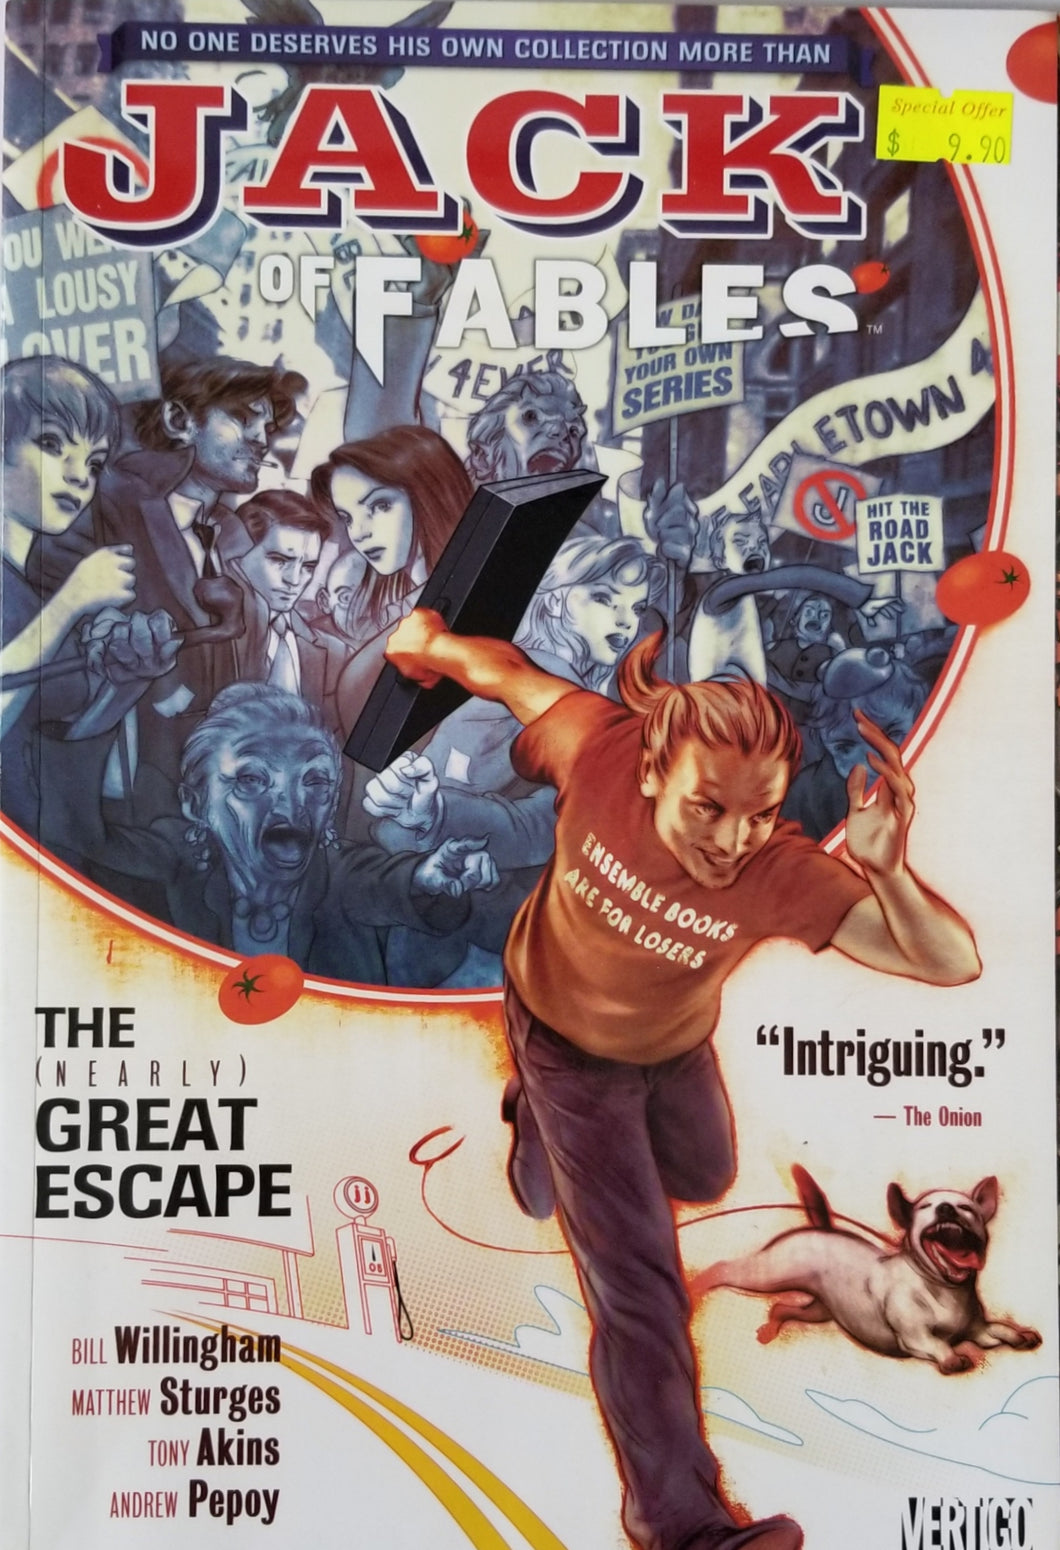 Jack of Fables: The Nearly Great Escape - Bill Willingham, Matthew Sturges, Tony Akins, Andrew Pepoy